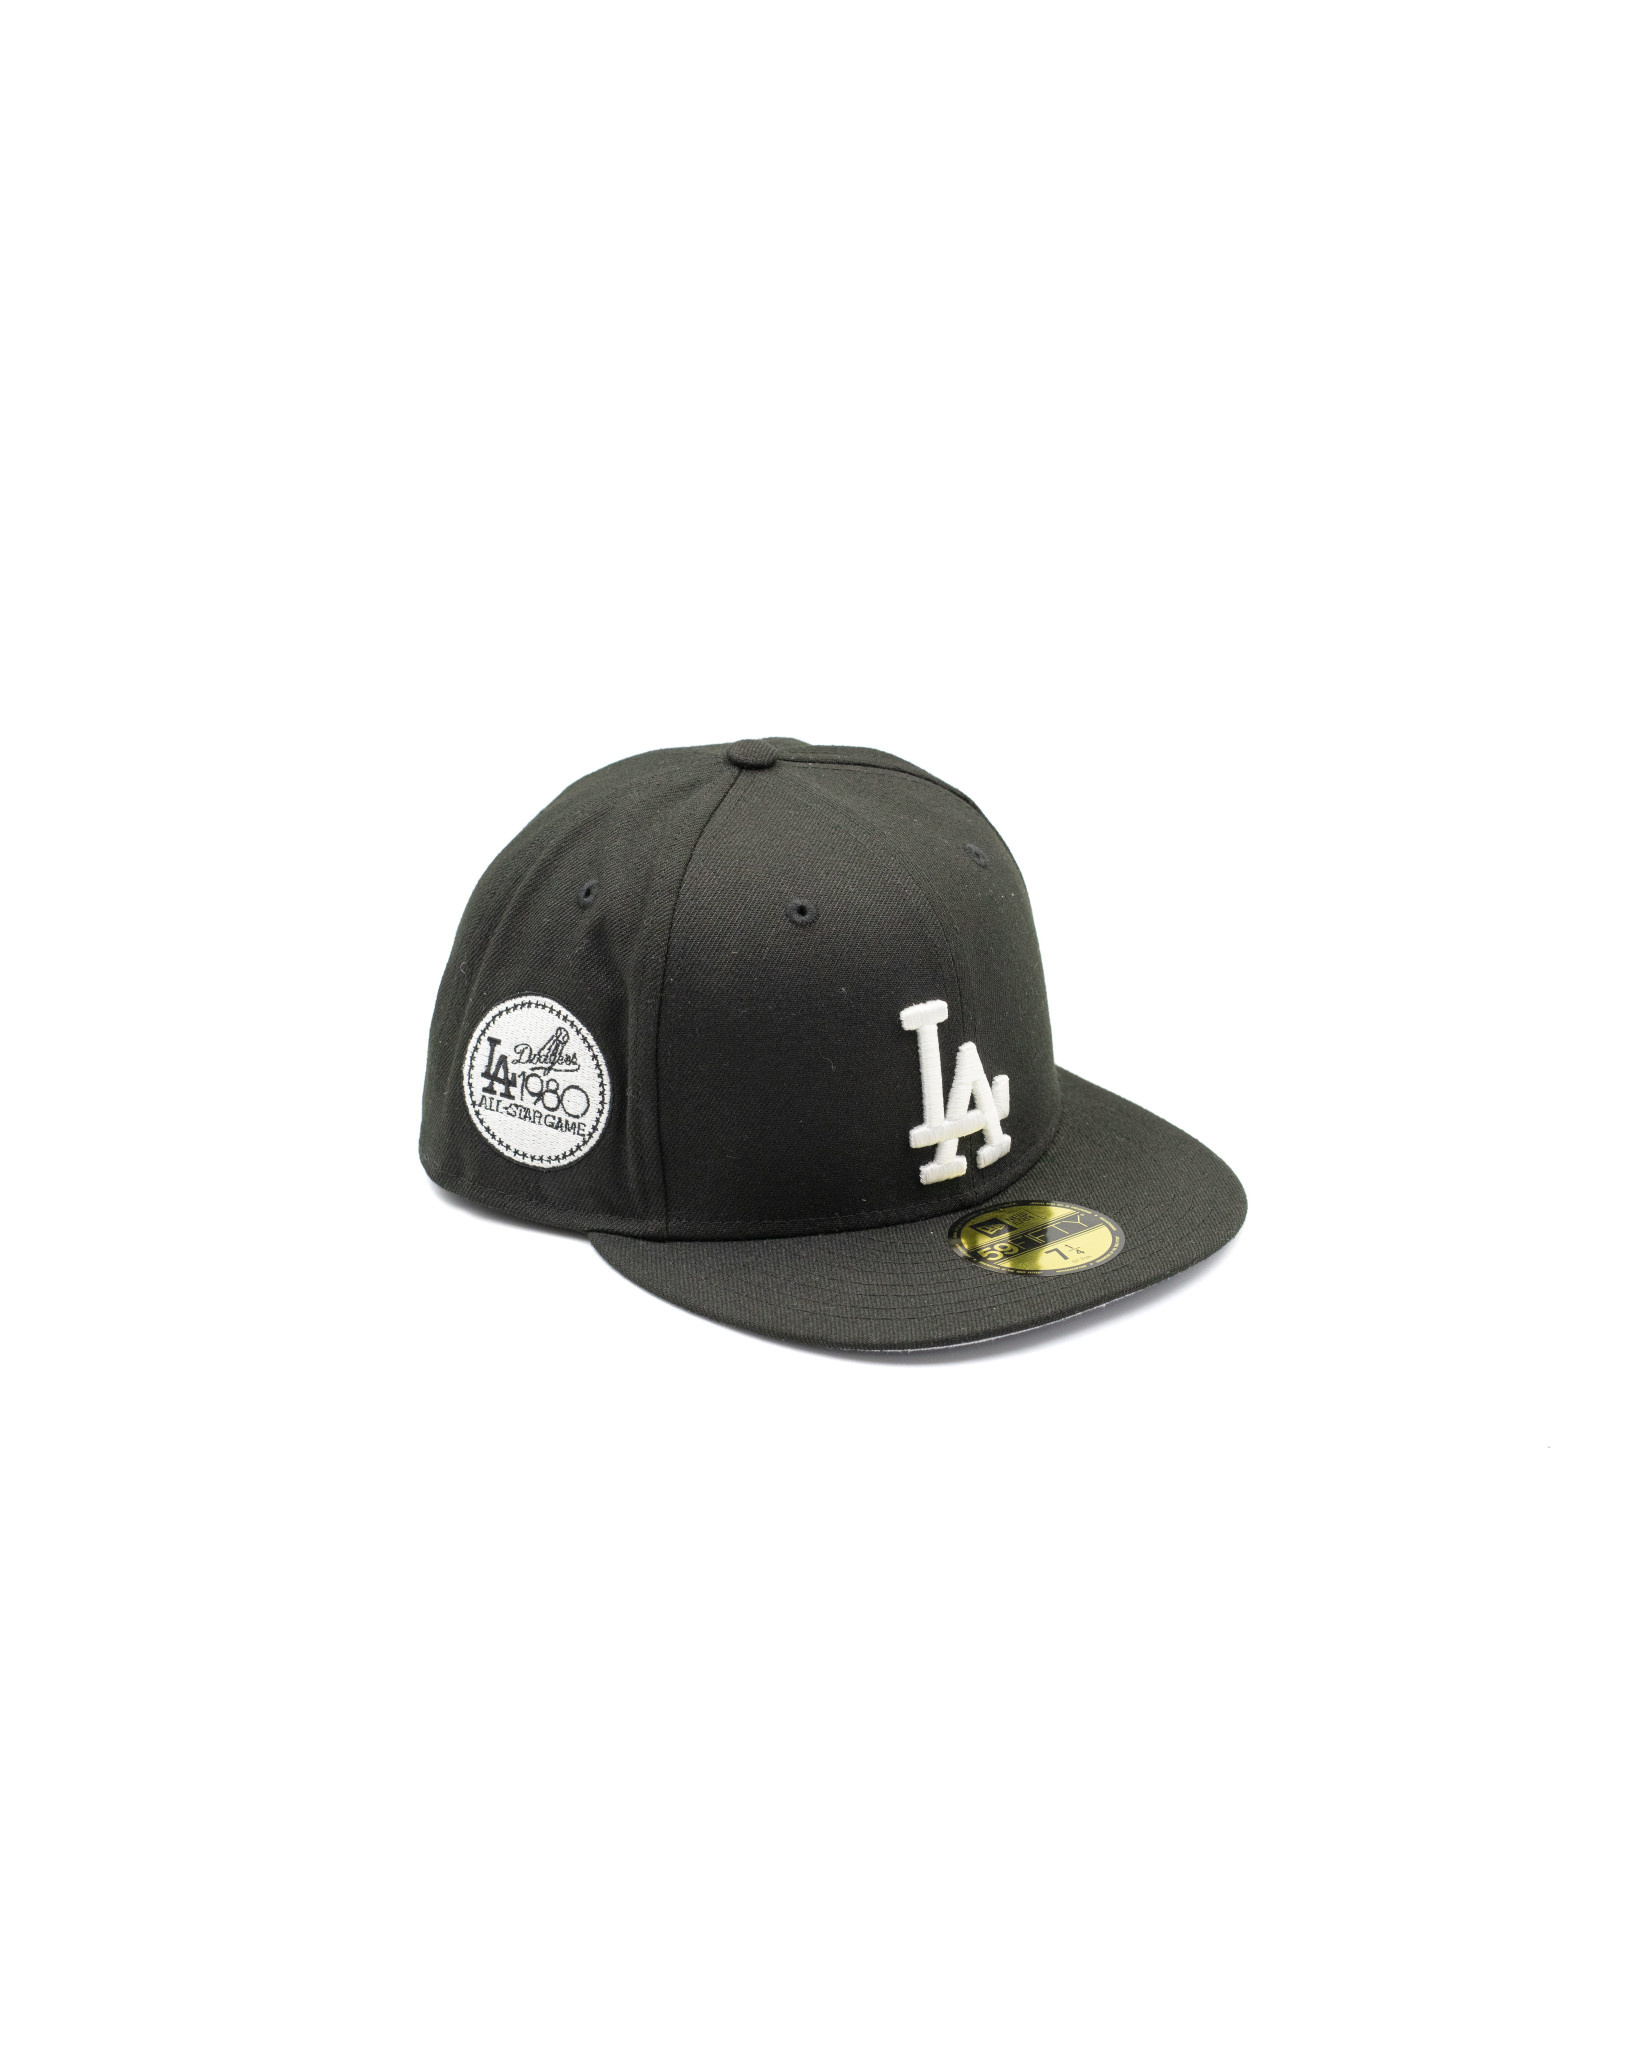 Los Angeles Dodgers Sidepatch Black 59FIFTY Fitted – New Era Cap